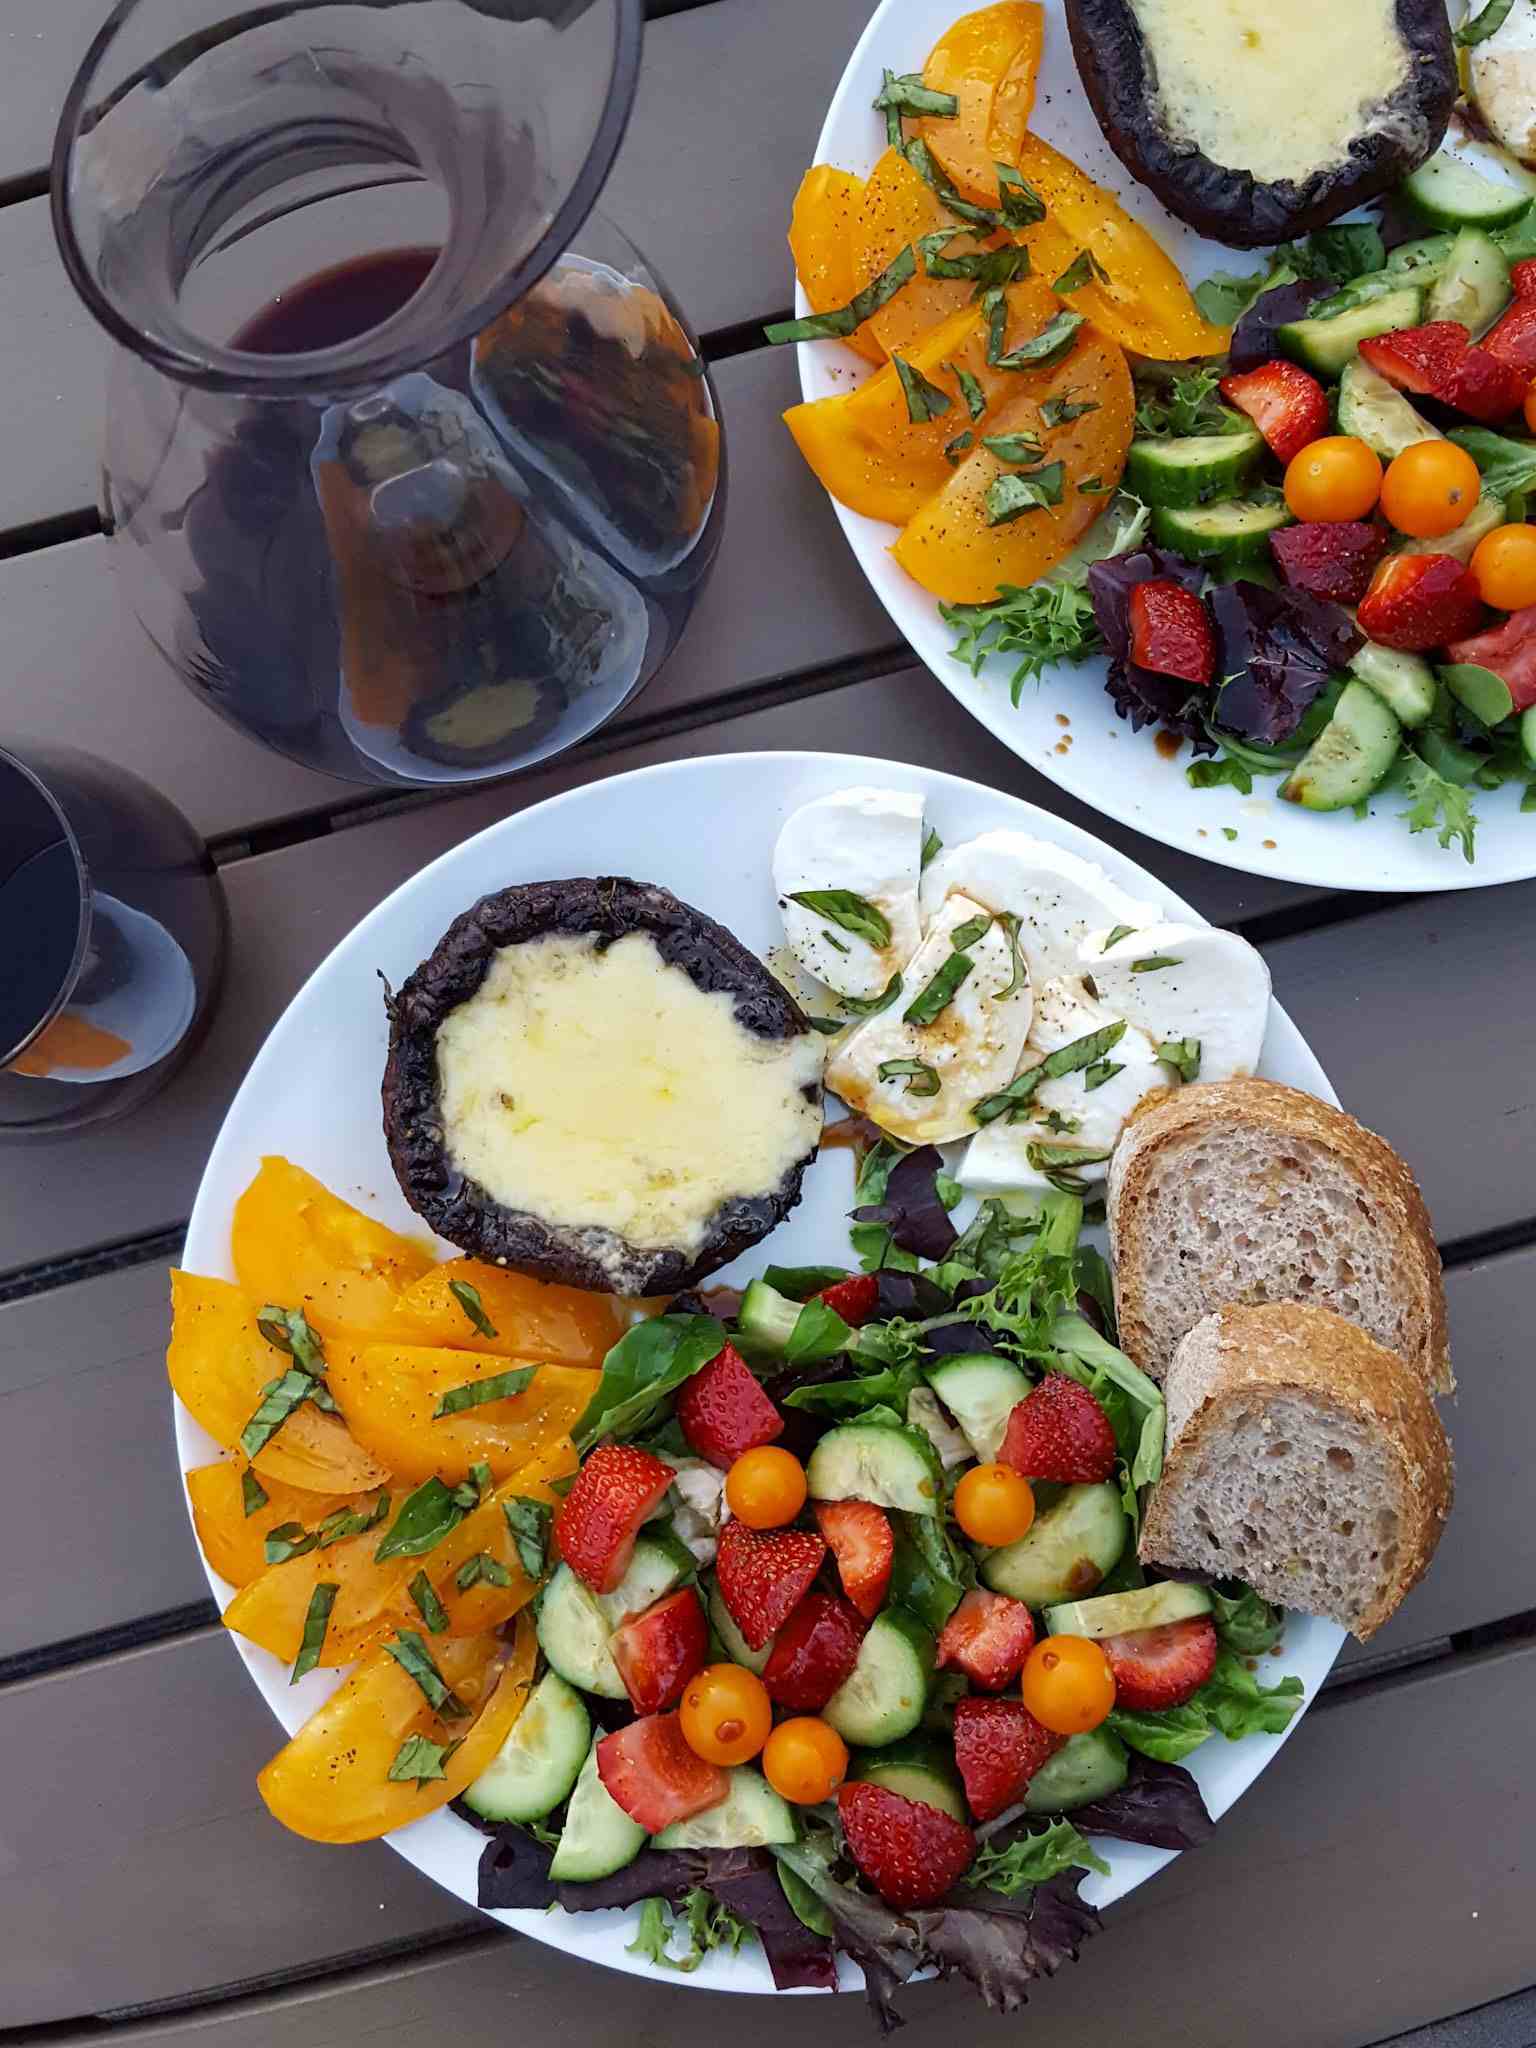 A mid summer dinner served on the outdoor patio table. There are two white ceramic dinner plates each one filled with fresh sliced yellow tomatoes, a green salad with Sungold tomatoes, cucumber, and strawberries, two slices of sourdough bread, slices of fresh mozzarella, and a grilled portabella mushroom with melted cheese. There is a carafe of red wine next to a stemless wine glass full of wine. 